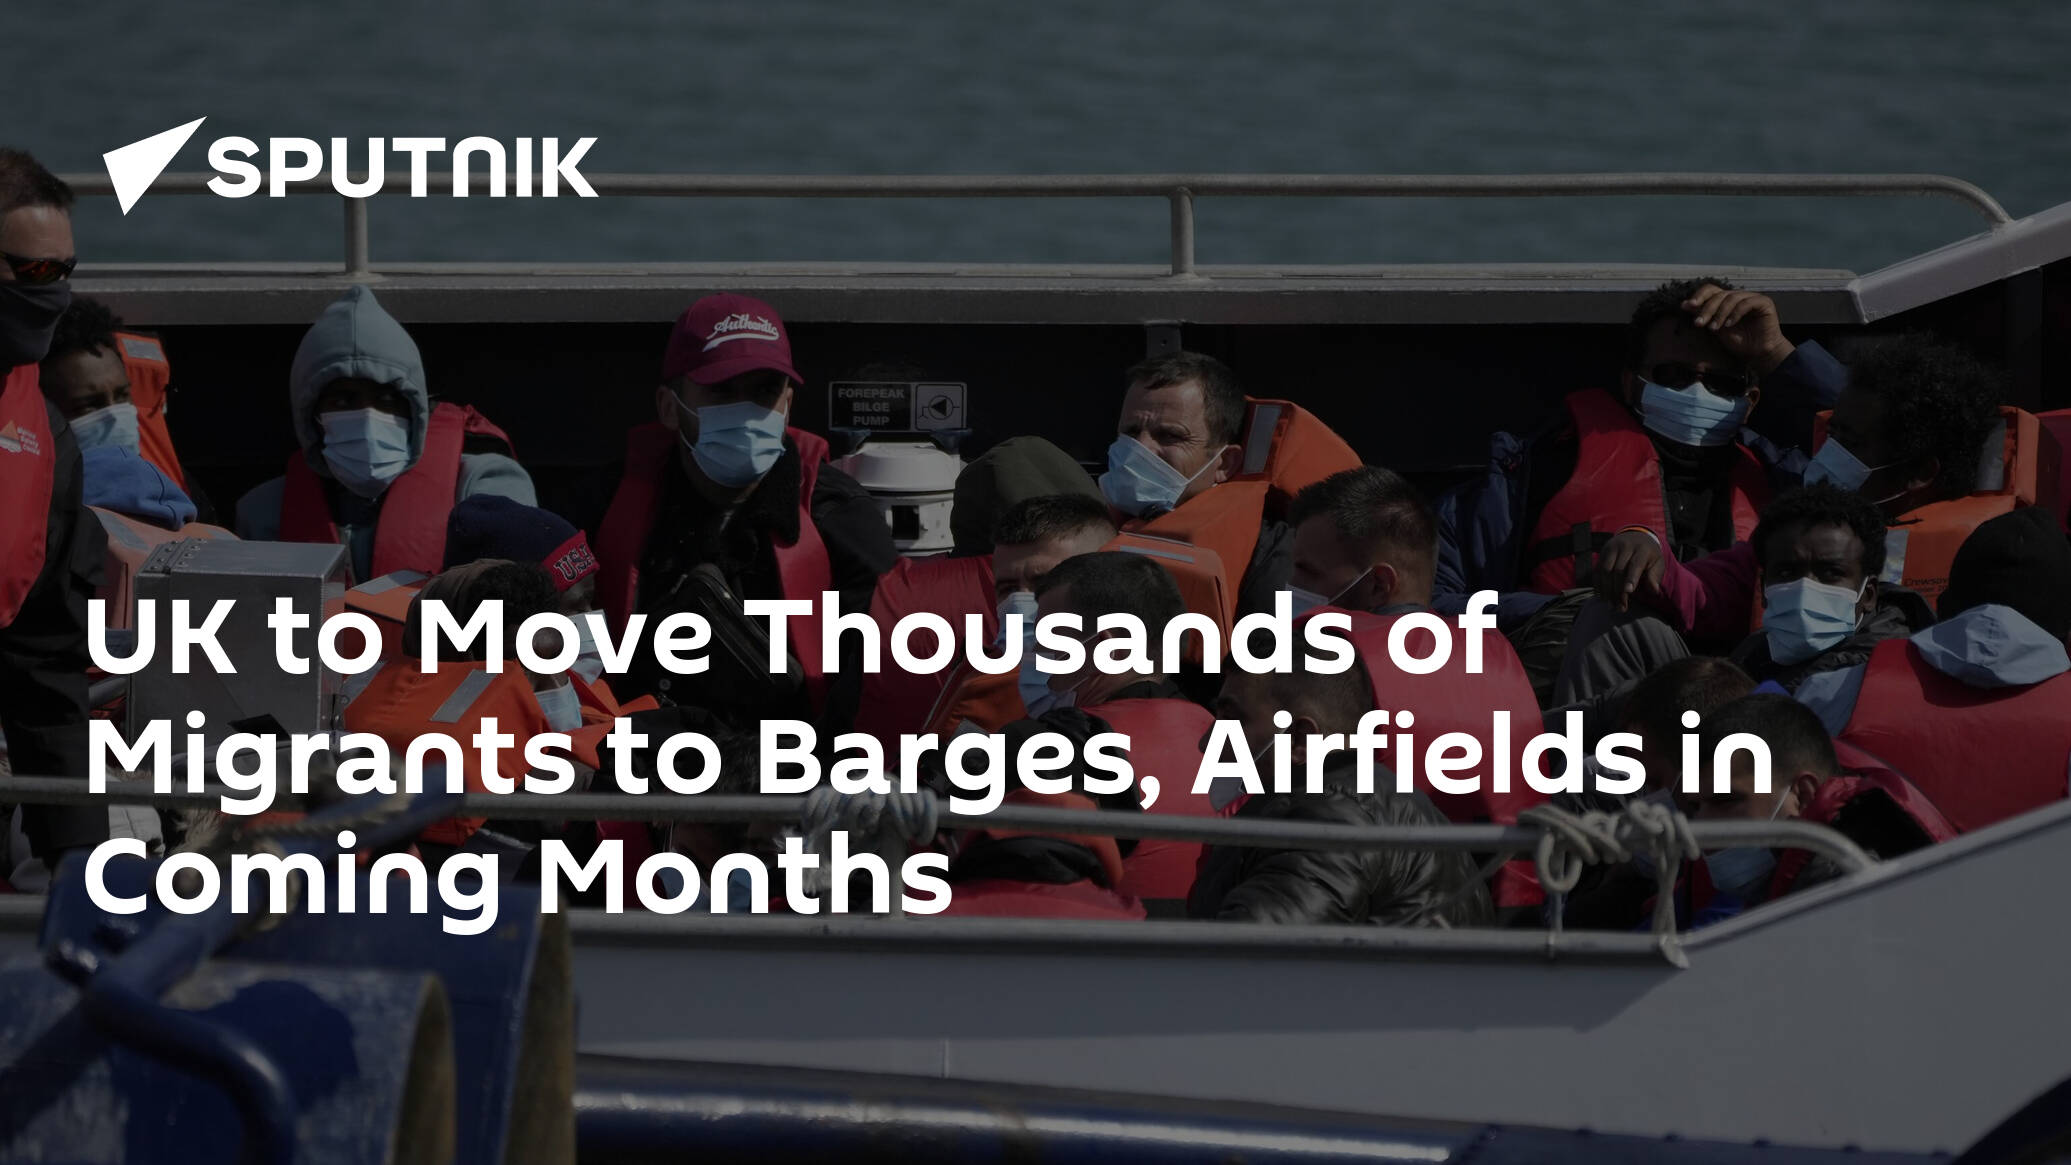 UK to Move Thousands of Migrants to Barges, Airfields in Coming Months